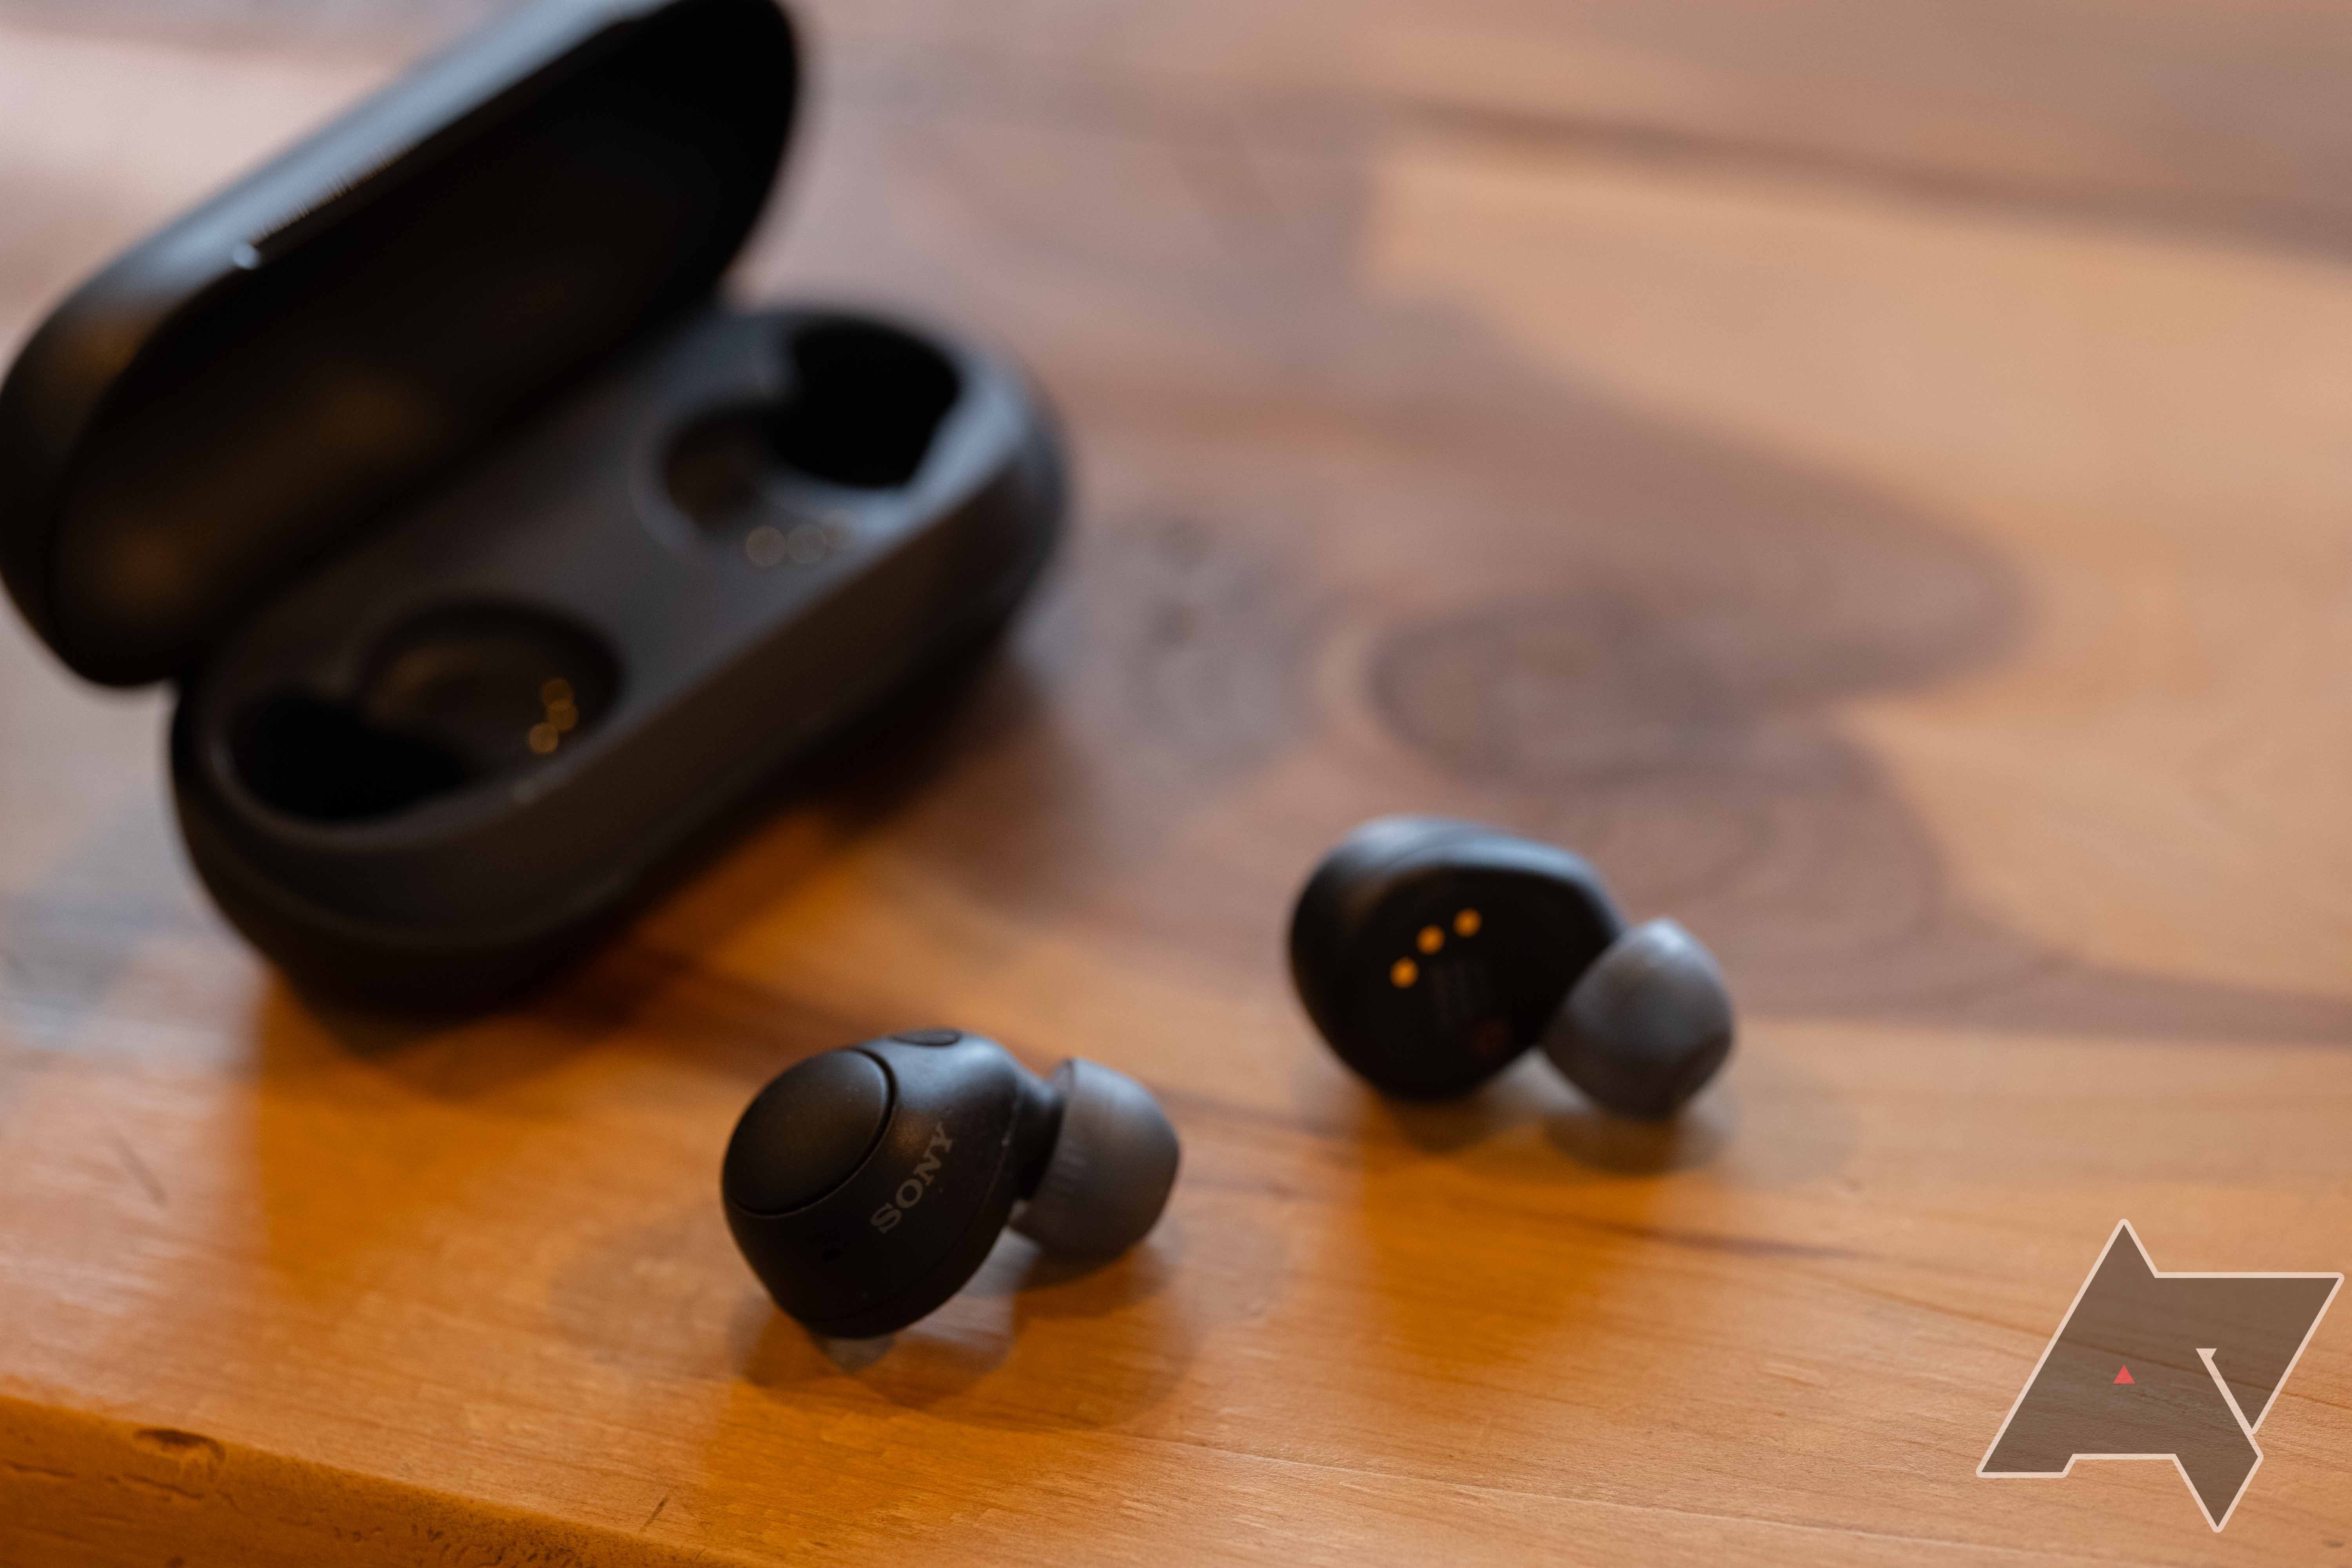 the Sony WF-C700N earbuds on a table in front of the open charging case